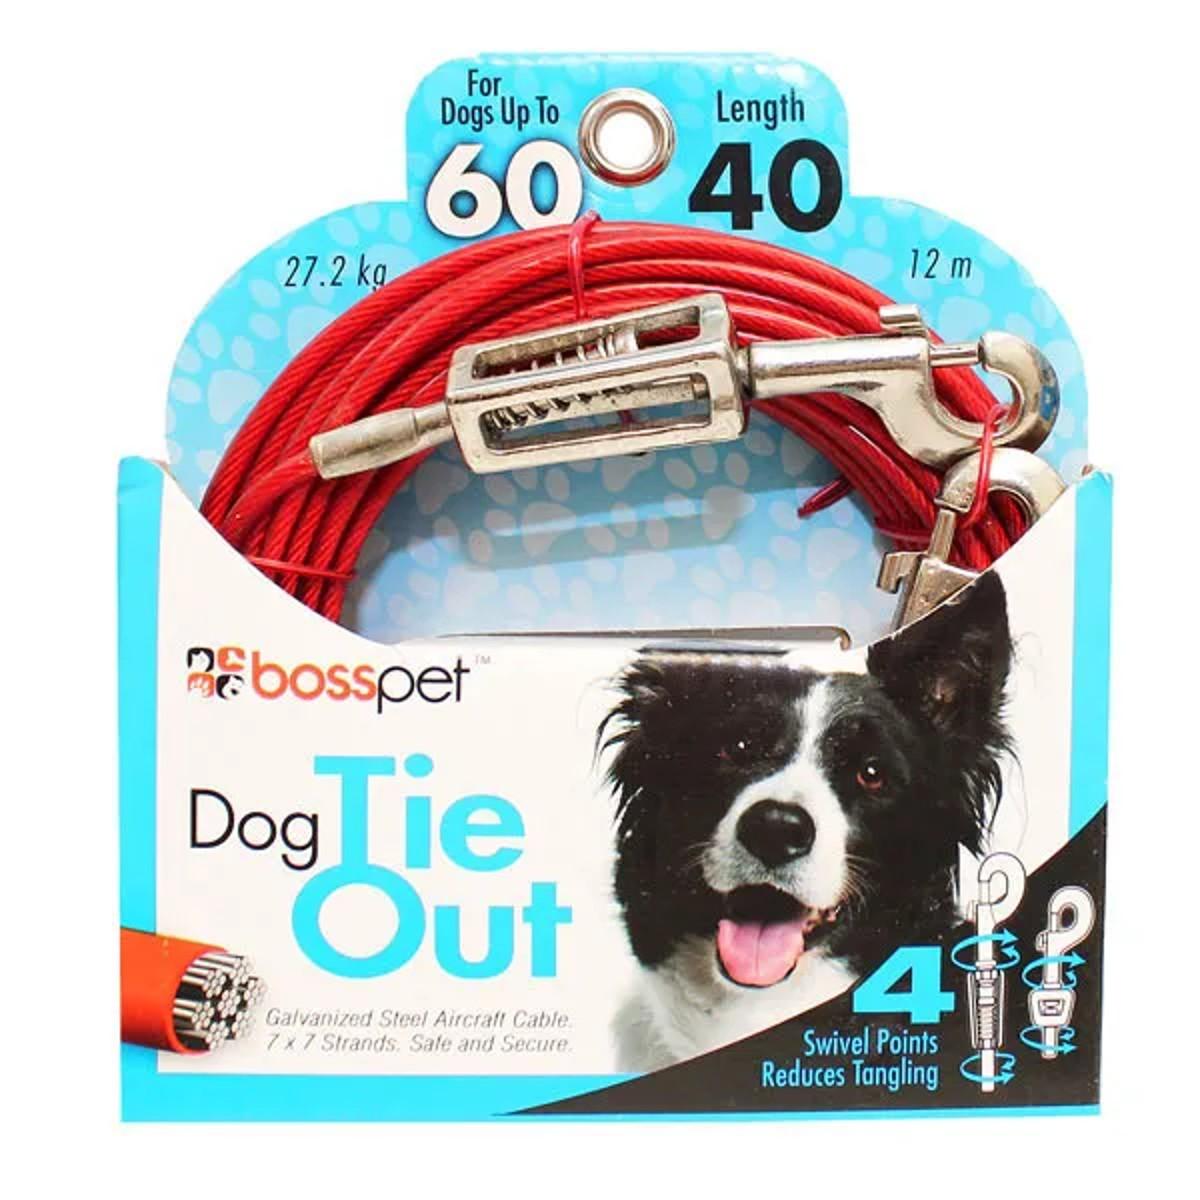 Boss Pet Vinyl Coated Cable Dog Tie-Out with Spring - Large Dog up to 60lbs